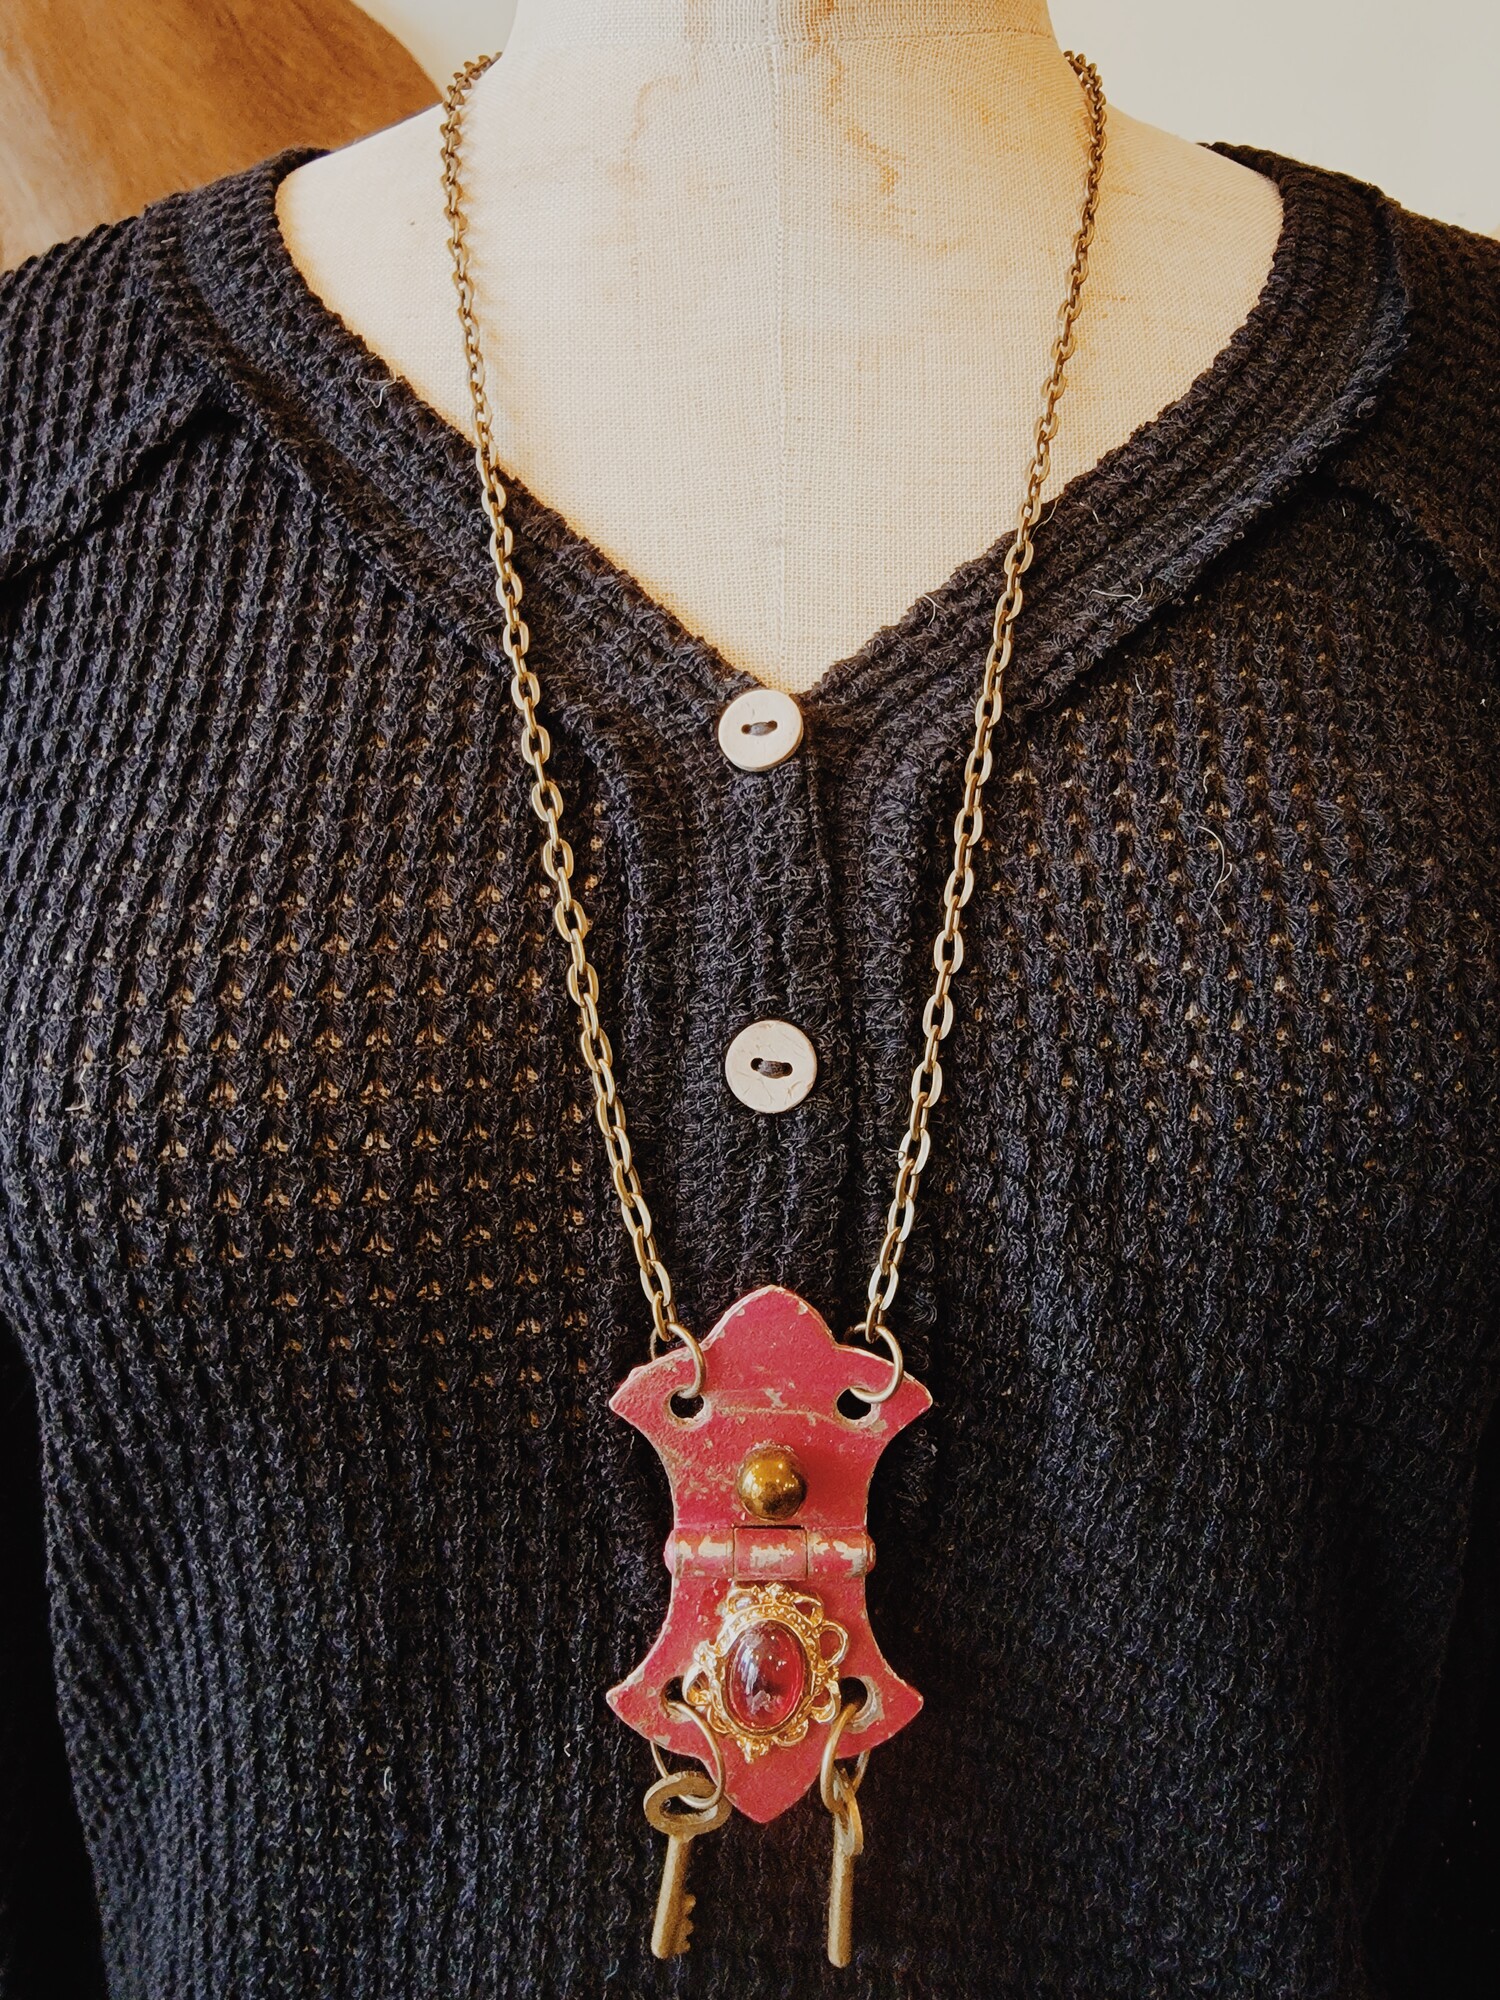 This lovely, hand crafted necklace is on a 29 inch chain and has an adorable red hinge as its pendant with a red stone in the center!